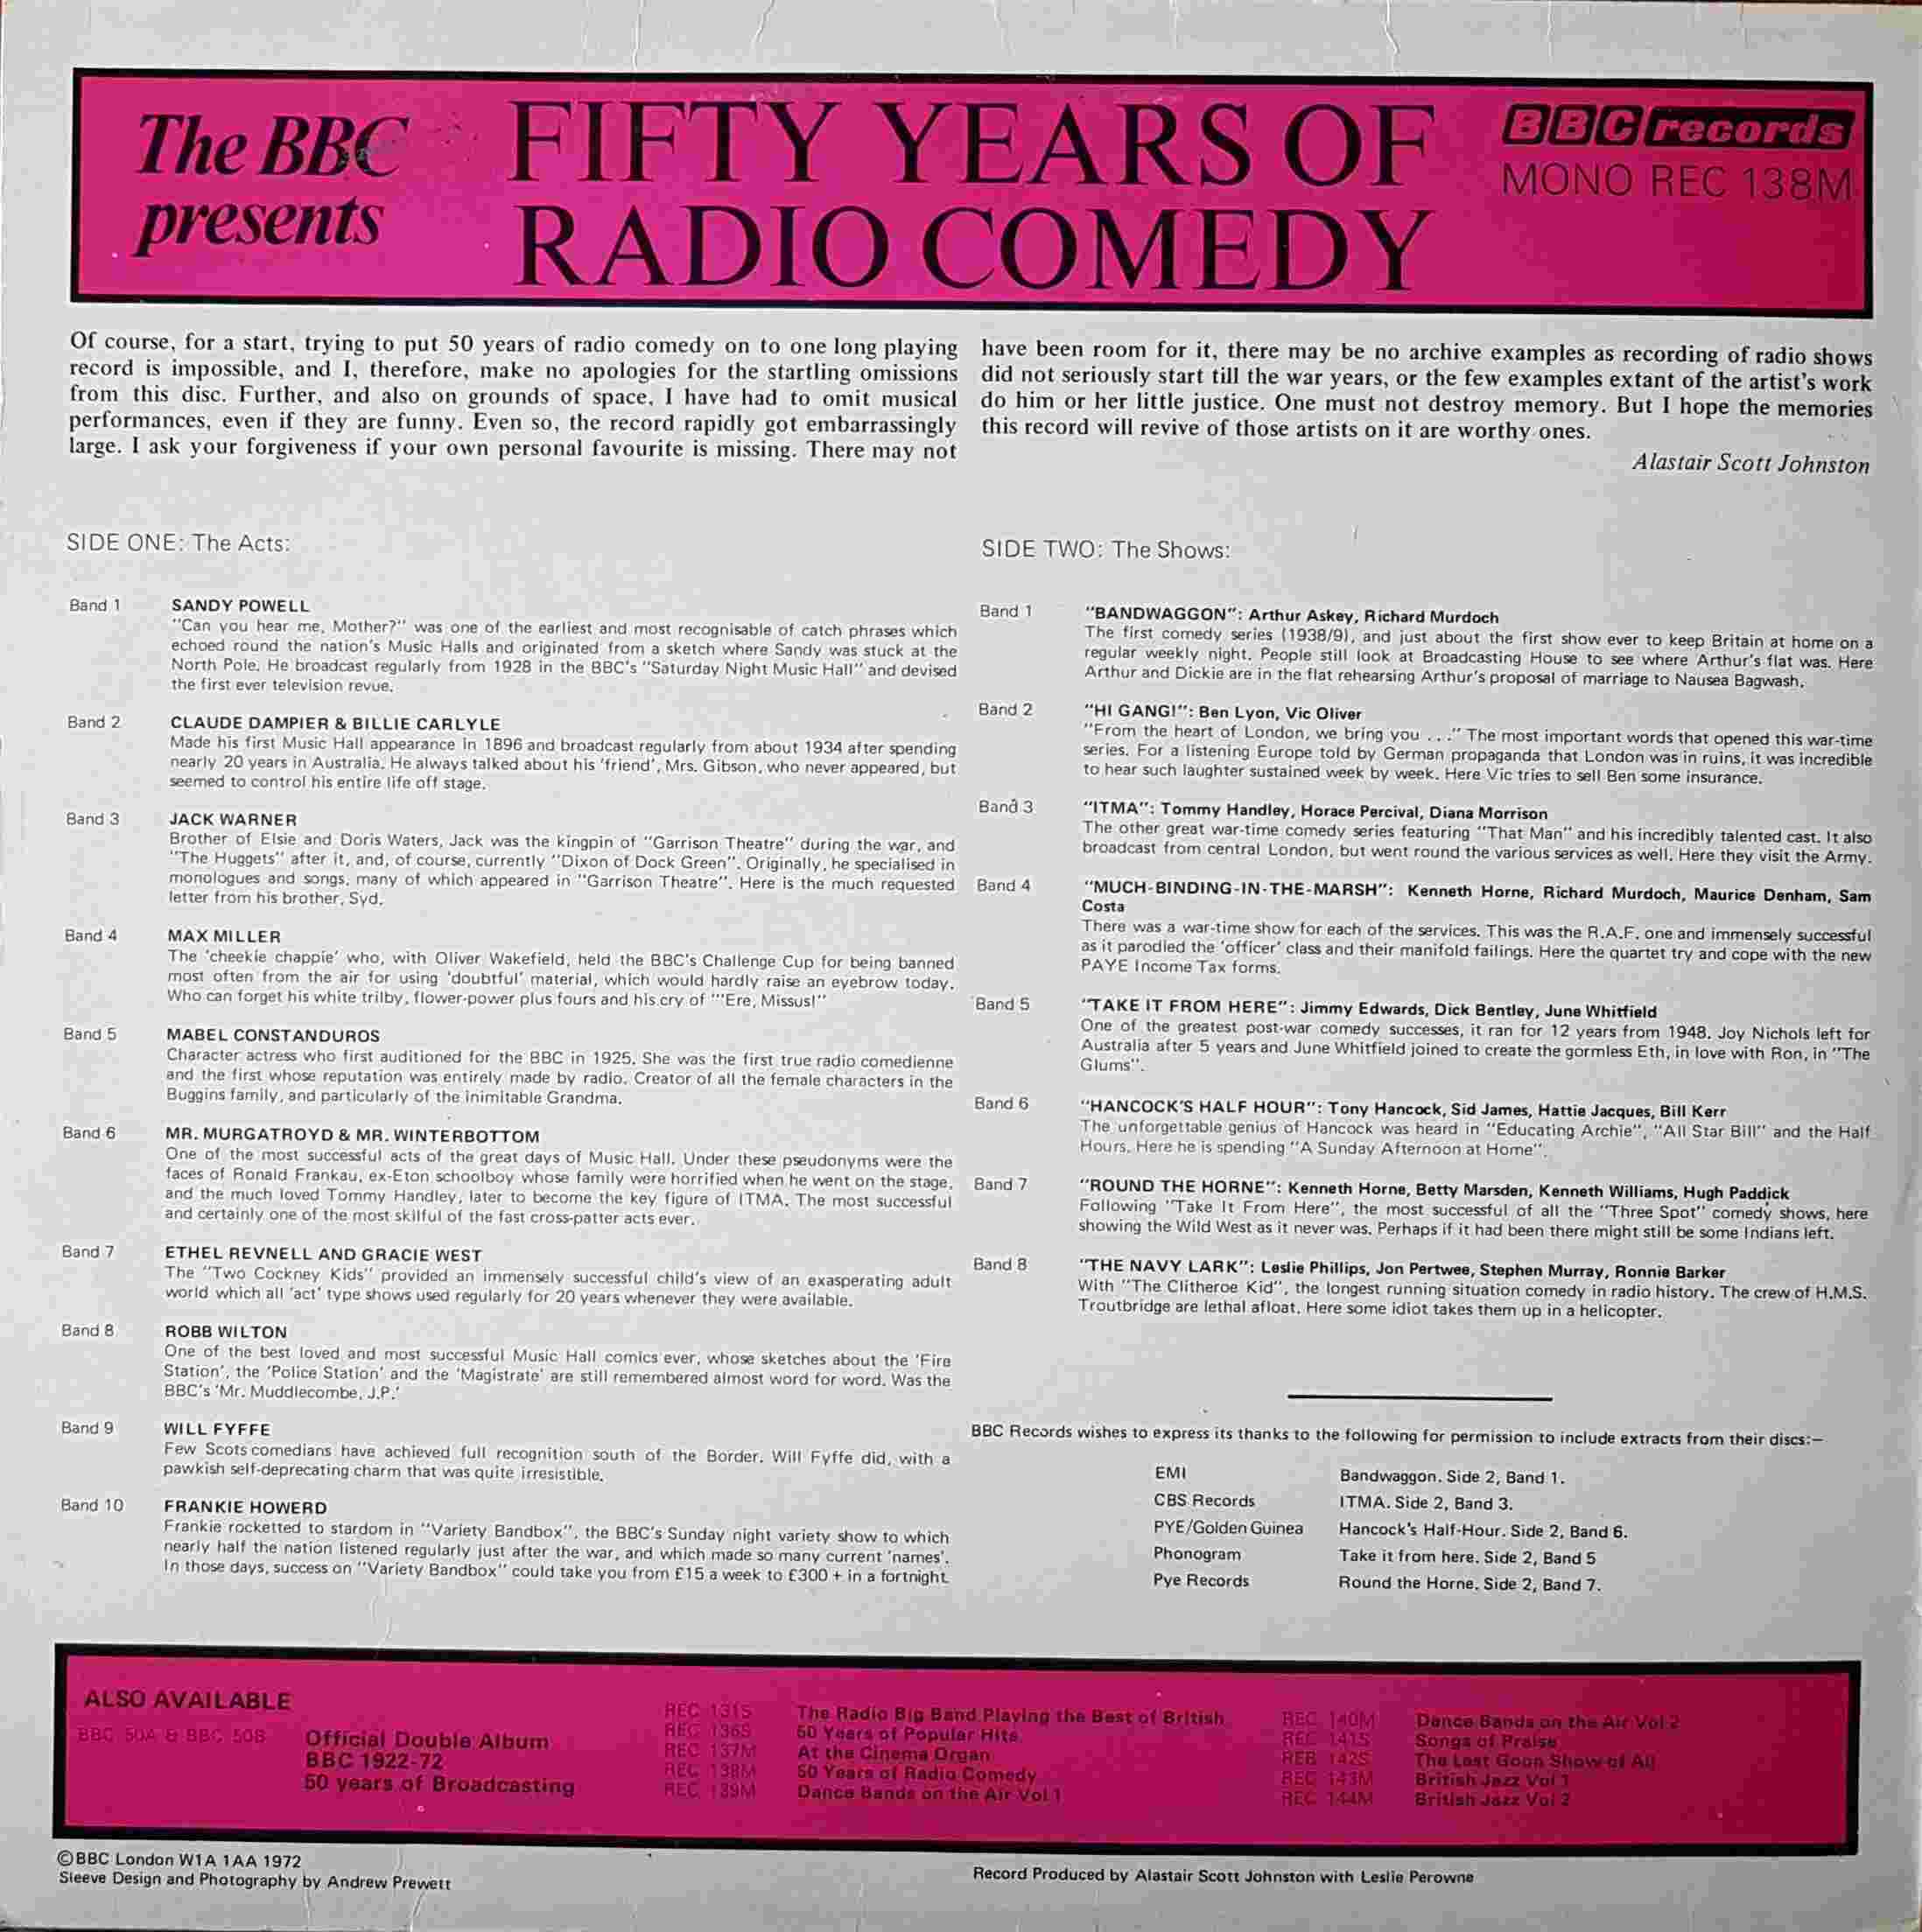 Picture of REC 138 50 years of radio comedy by artist Various from the BBC records and Tapes library